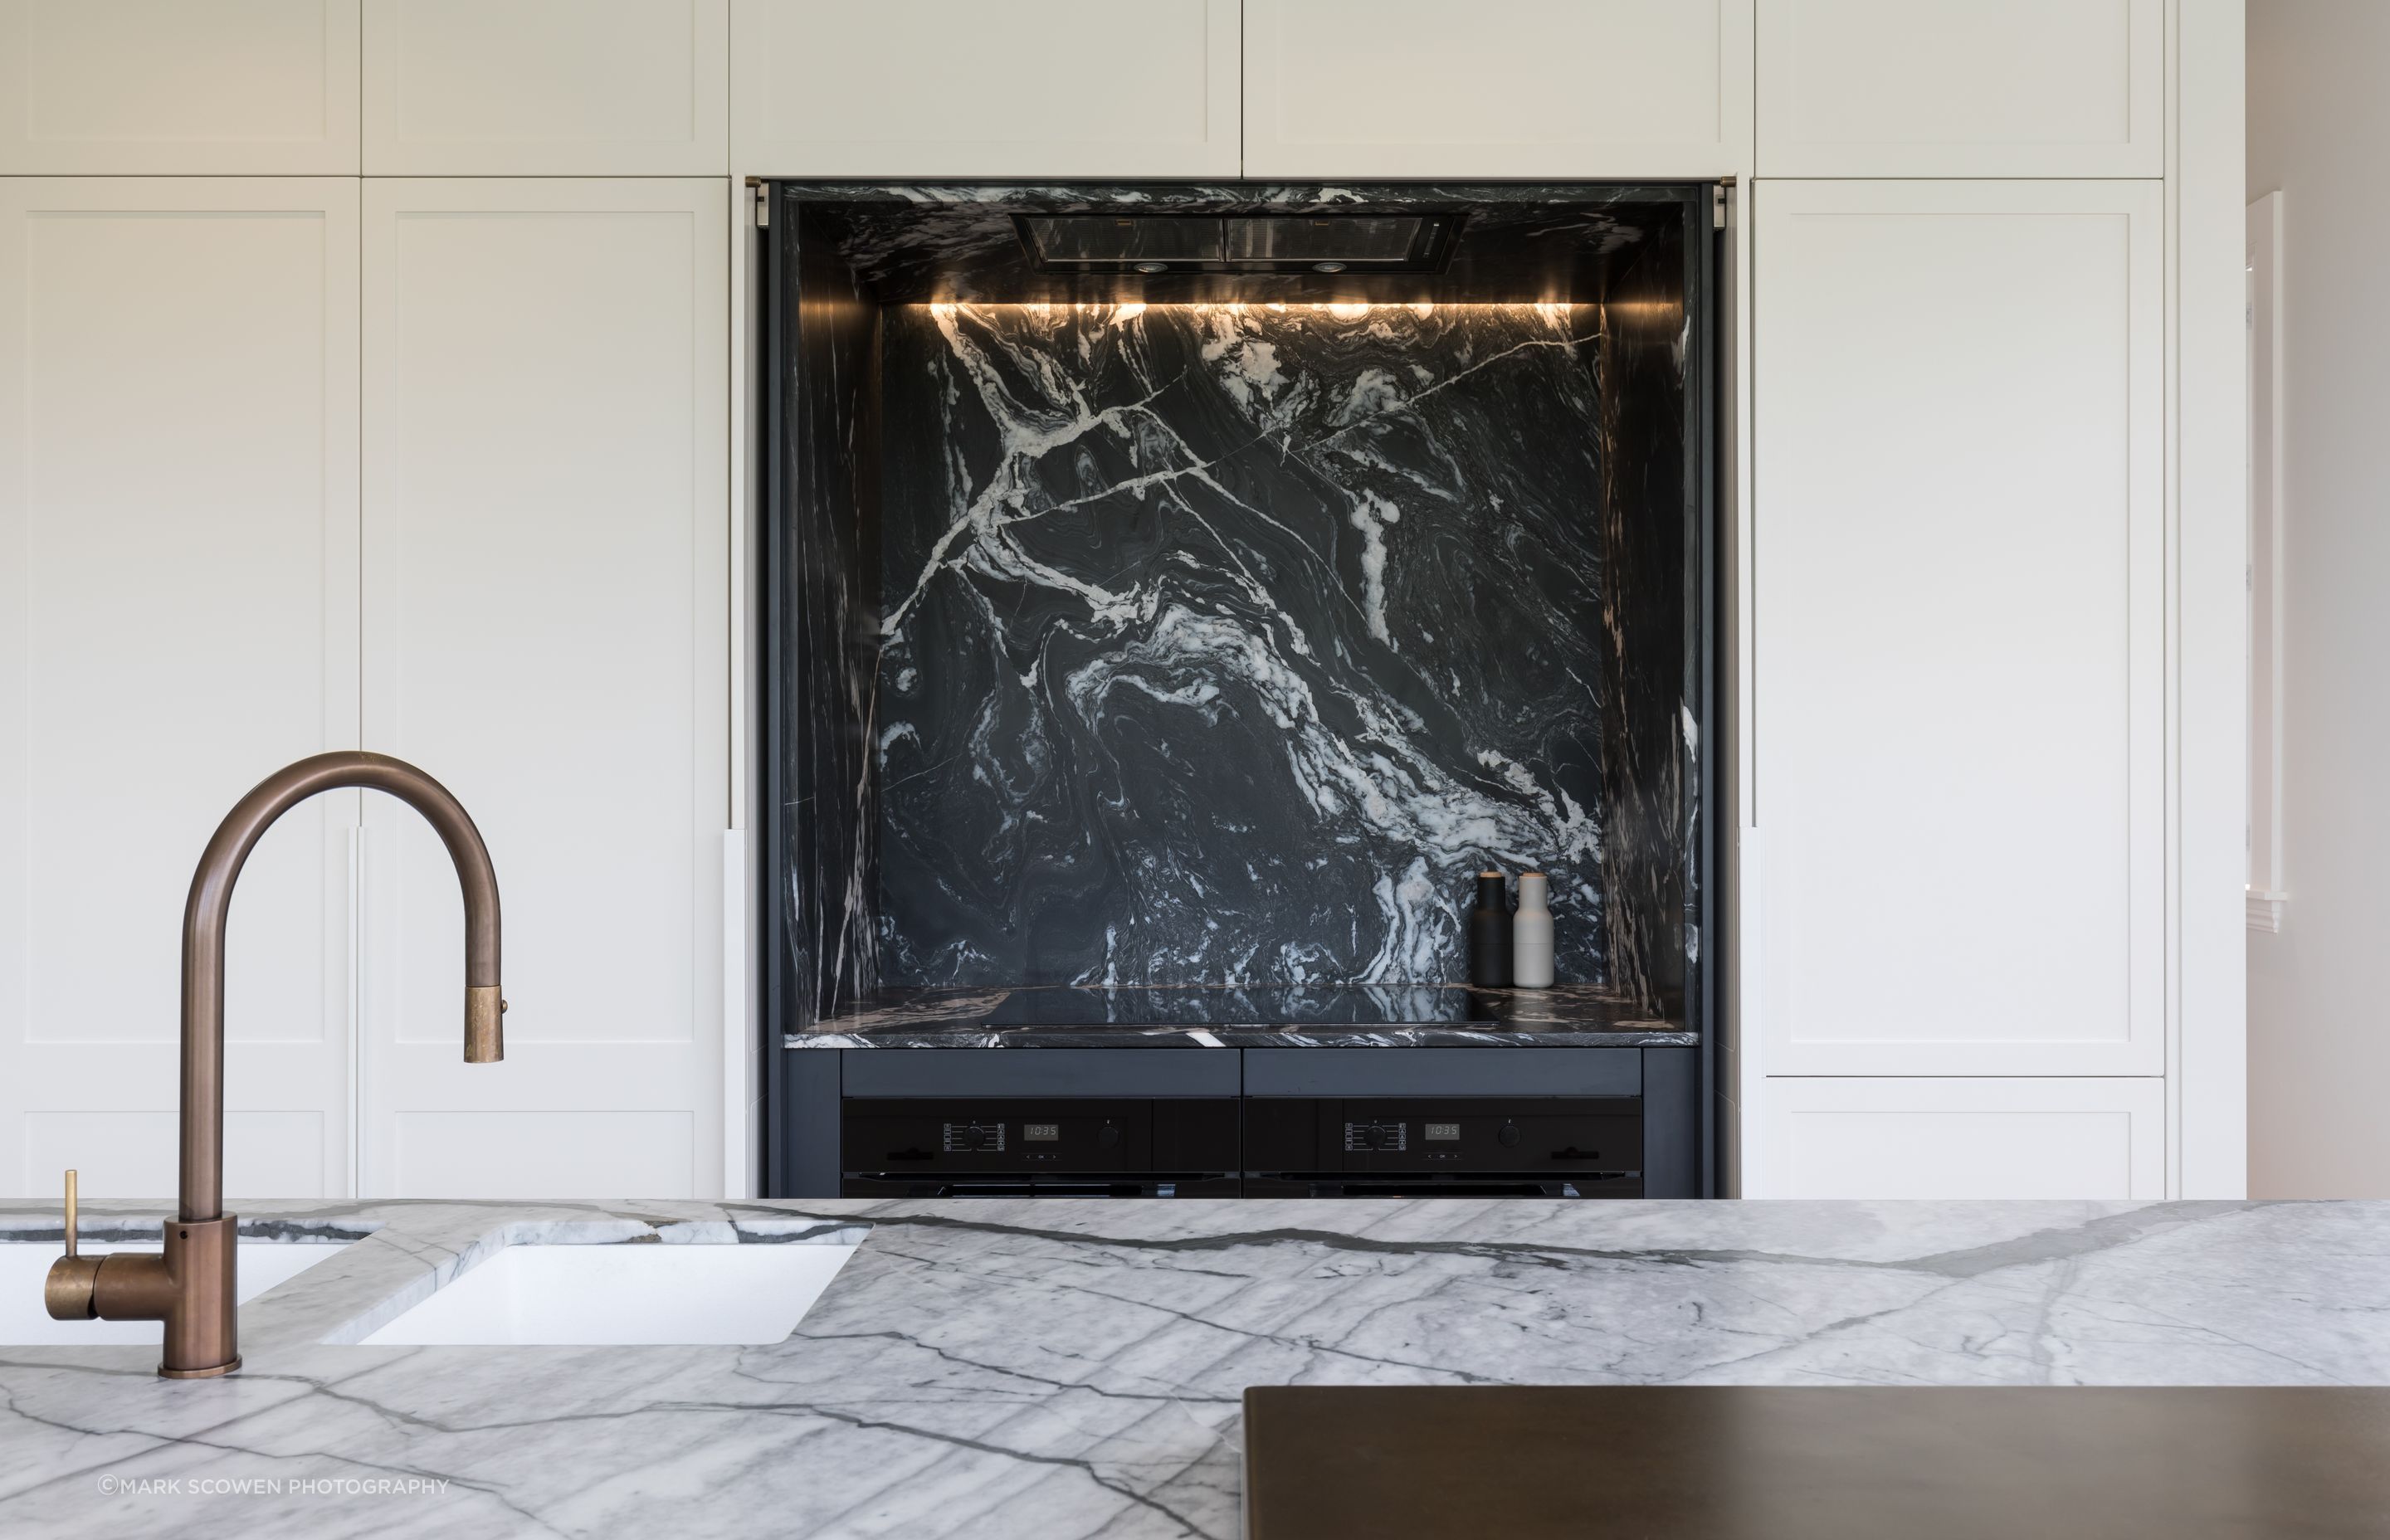 The kitchen in this Auckland family home renovation features Hawa Concepta doors by Häfele in the hob area that pivot and retract into pockets, exposing the bold dark marble counterpoint to the light marble of the island.